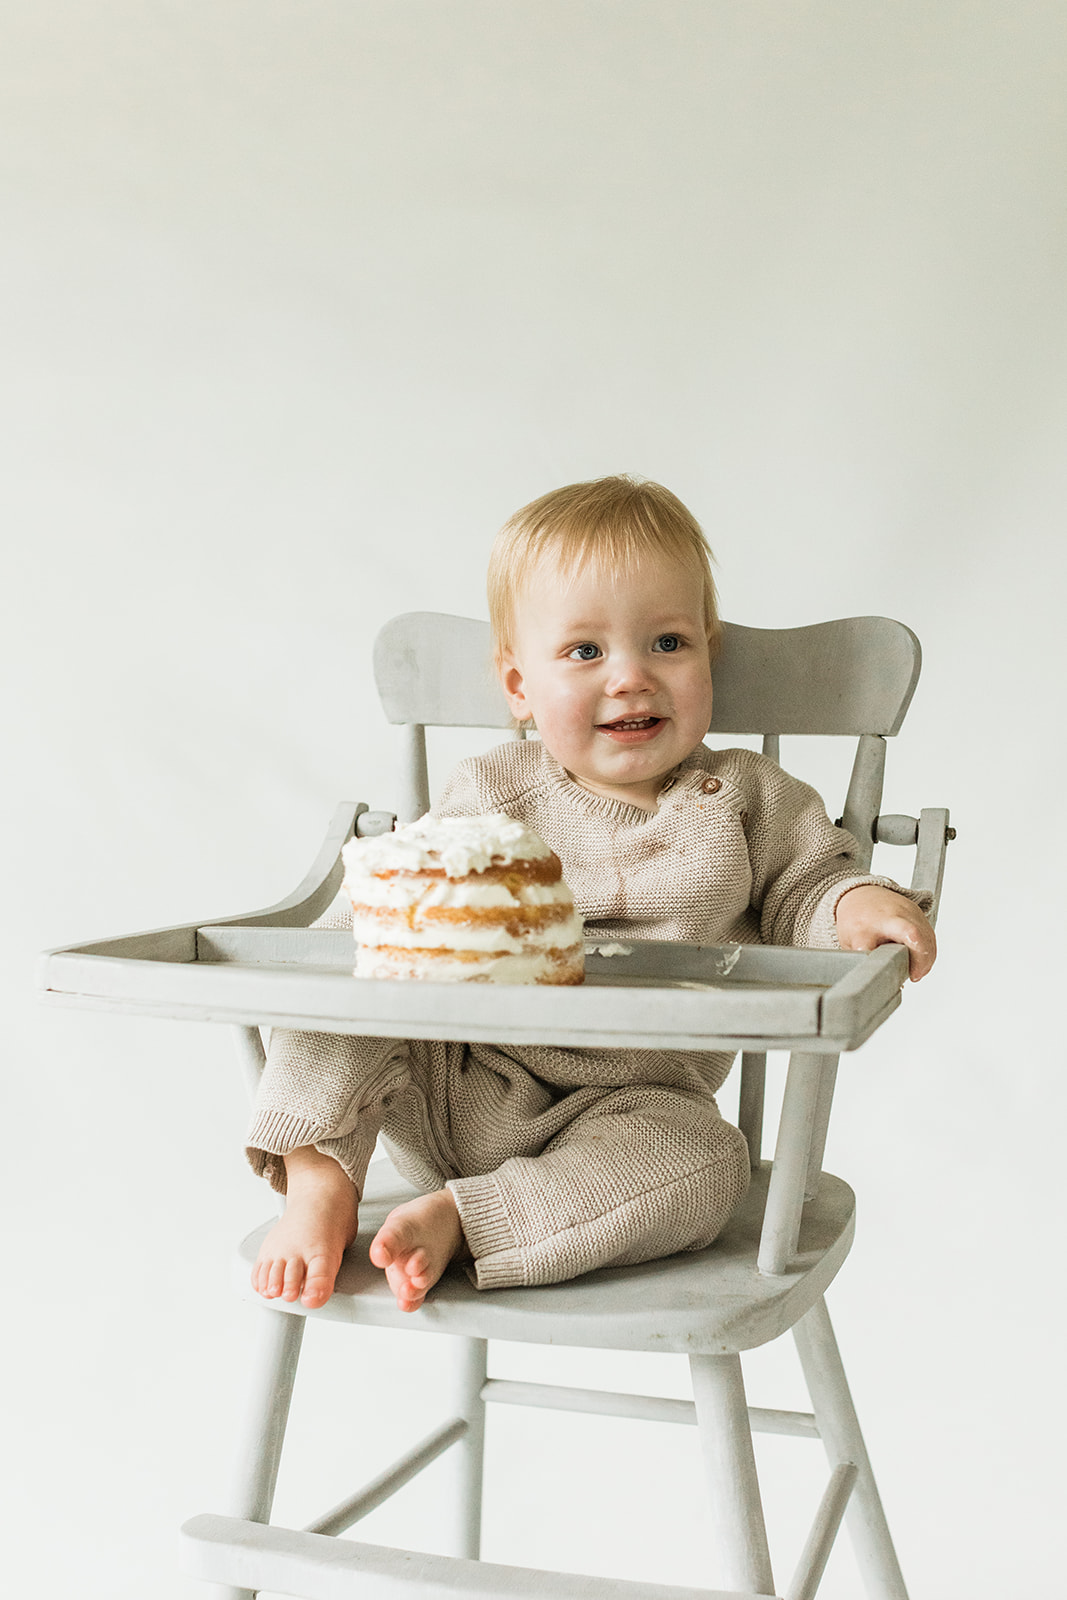 1 year old photo shoot in nashville tennessee. birthday cake smash. baby on high chair with cake